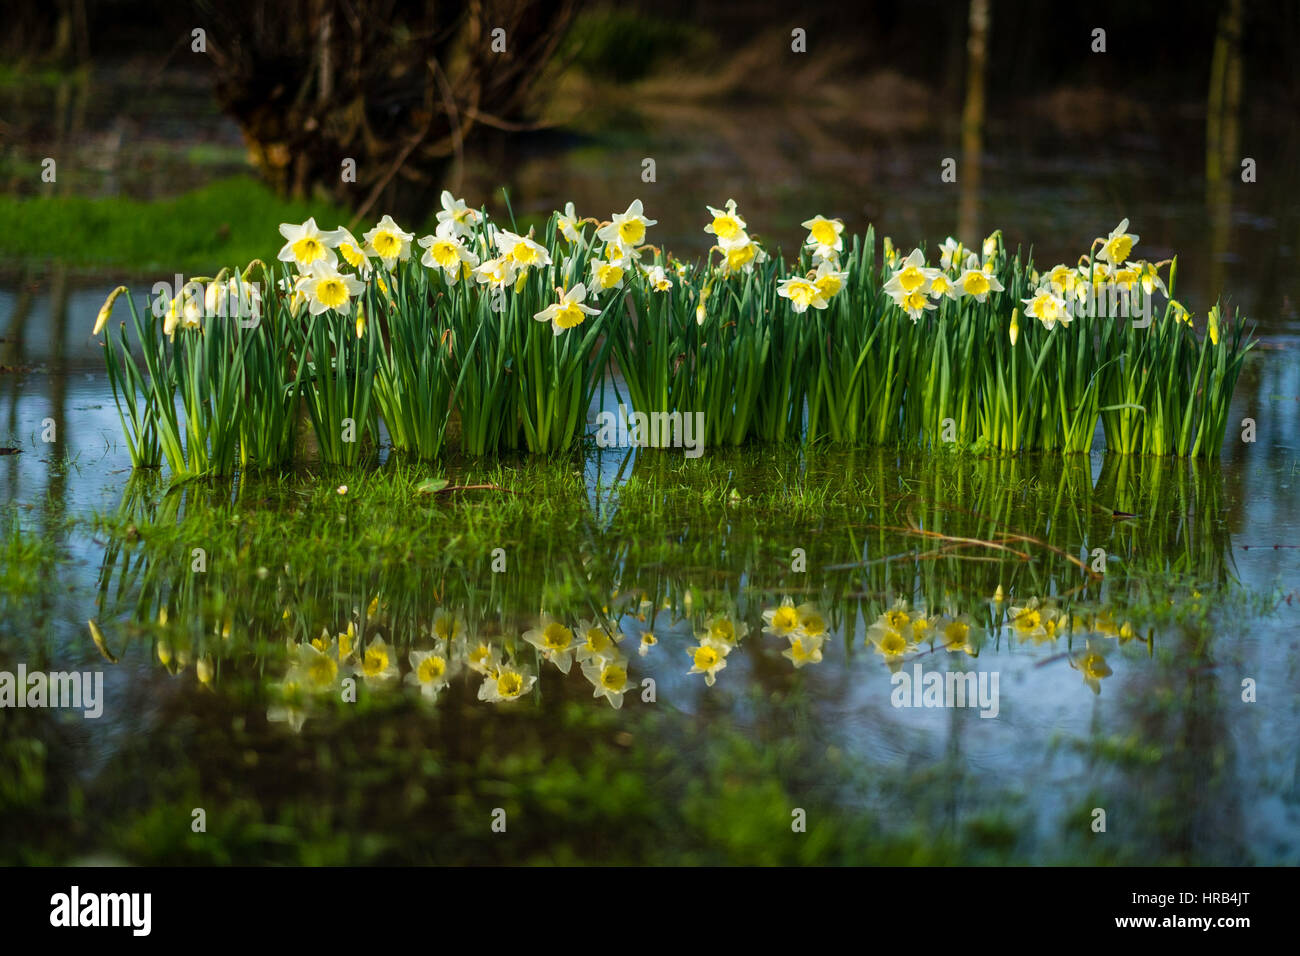 Aberystwyth, Wales, UK. 1st Mar, 2017. UK Weather: Bright yellow and white Daffodils, the national emblem of Wales bursting into bloom and reflected in a pool of water on a flooded field in Aberystwyth on March 1st, St David's Day (The national Saints day for Wales) More wintery, cold weather, with strong winds and the risk of snow in places, is forecast for the day photo Credit: Keith Morris/Alamy Live News Stock Photo